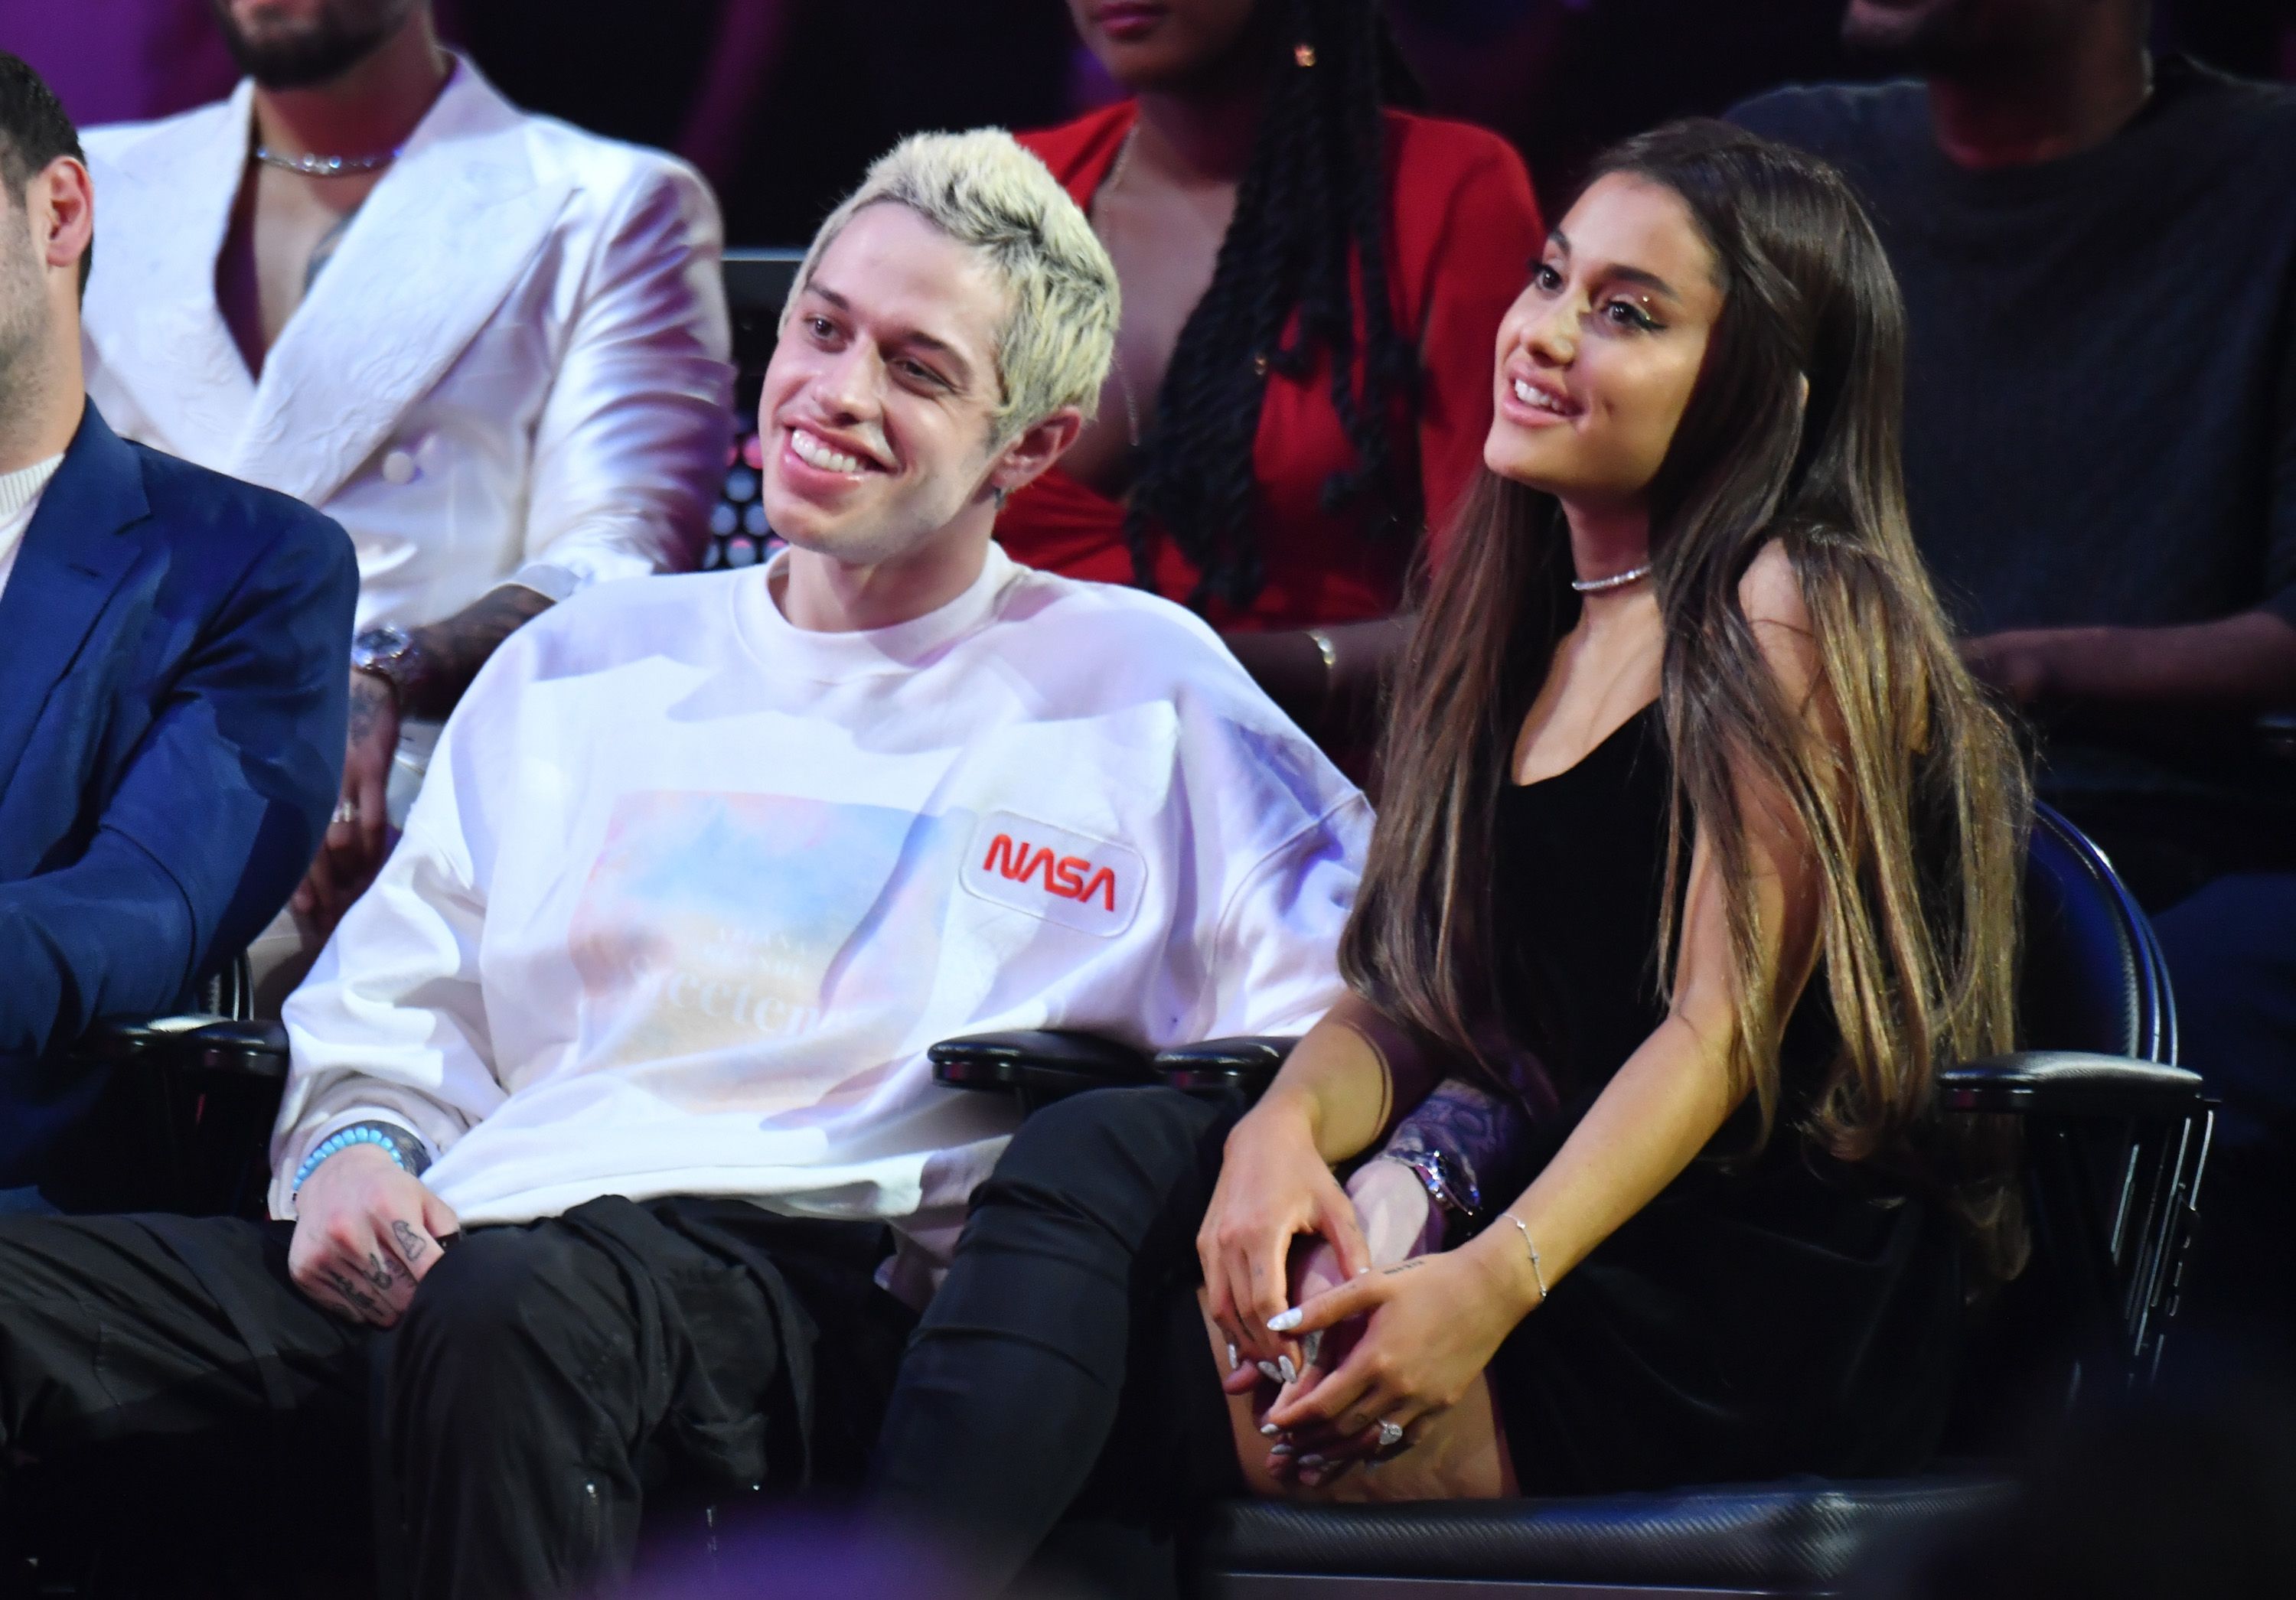 The Real Reason Ariana Grande Covered Her Pete Davidson Tattoo With a Mac  Miller Reference